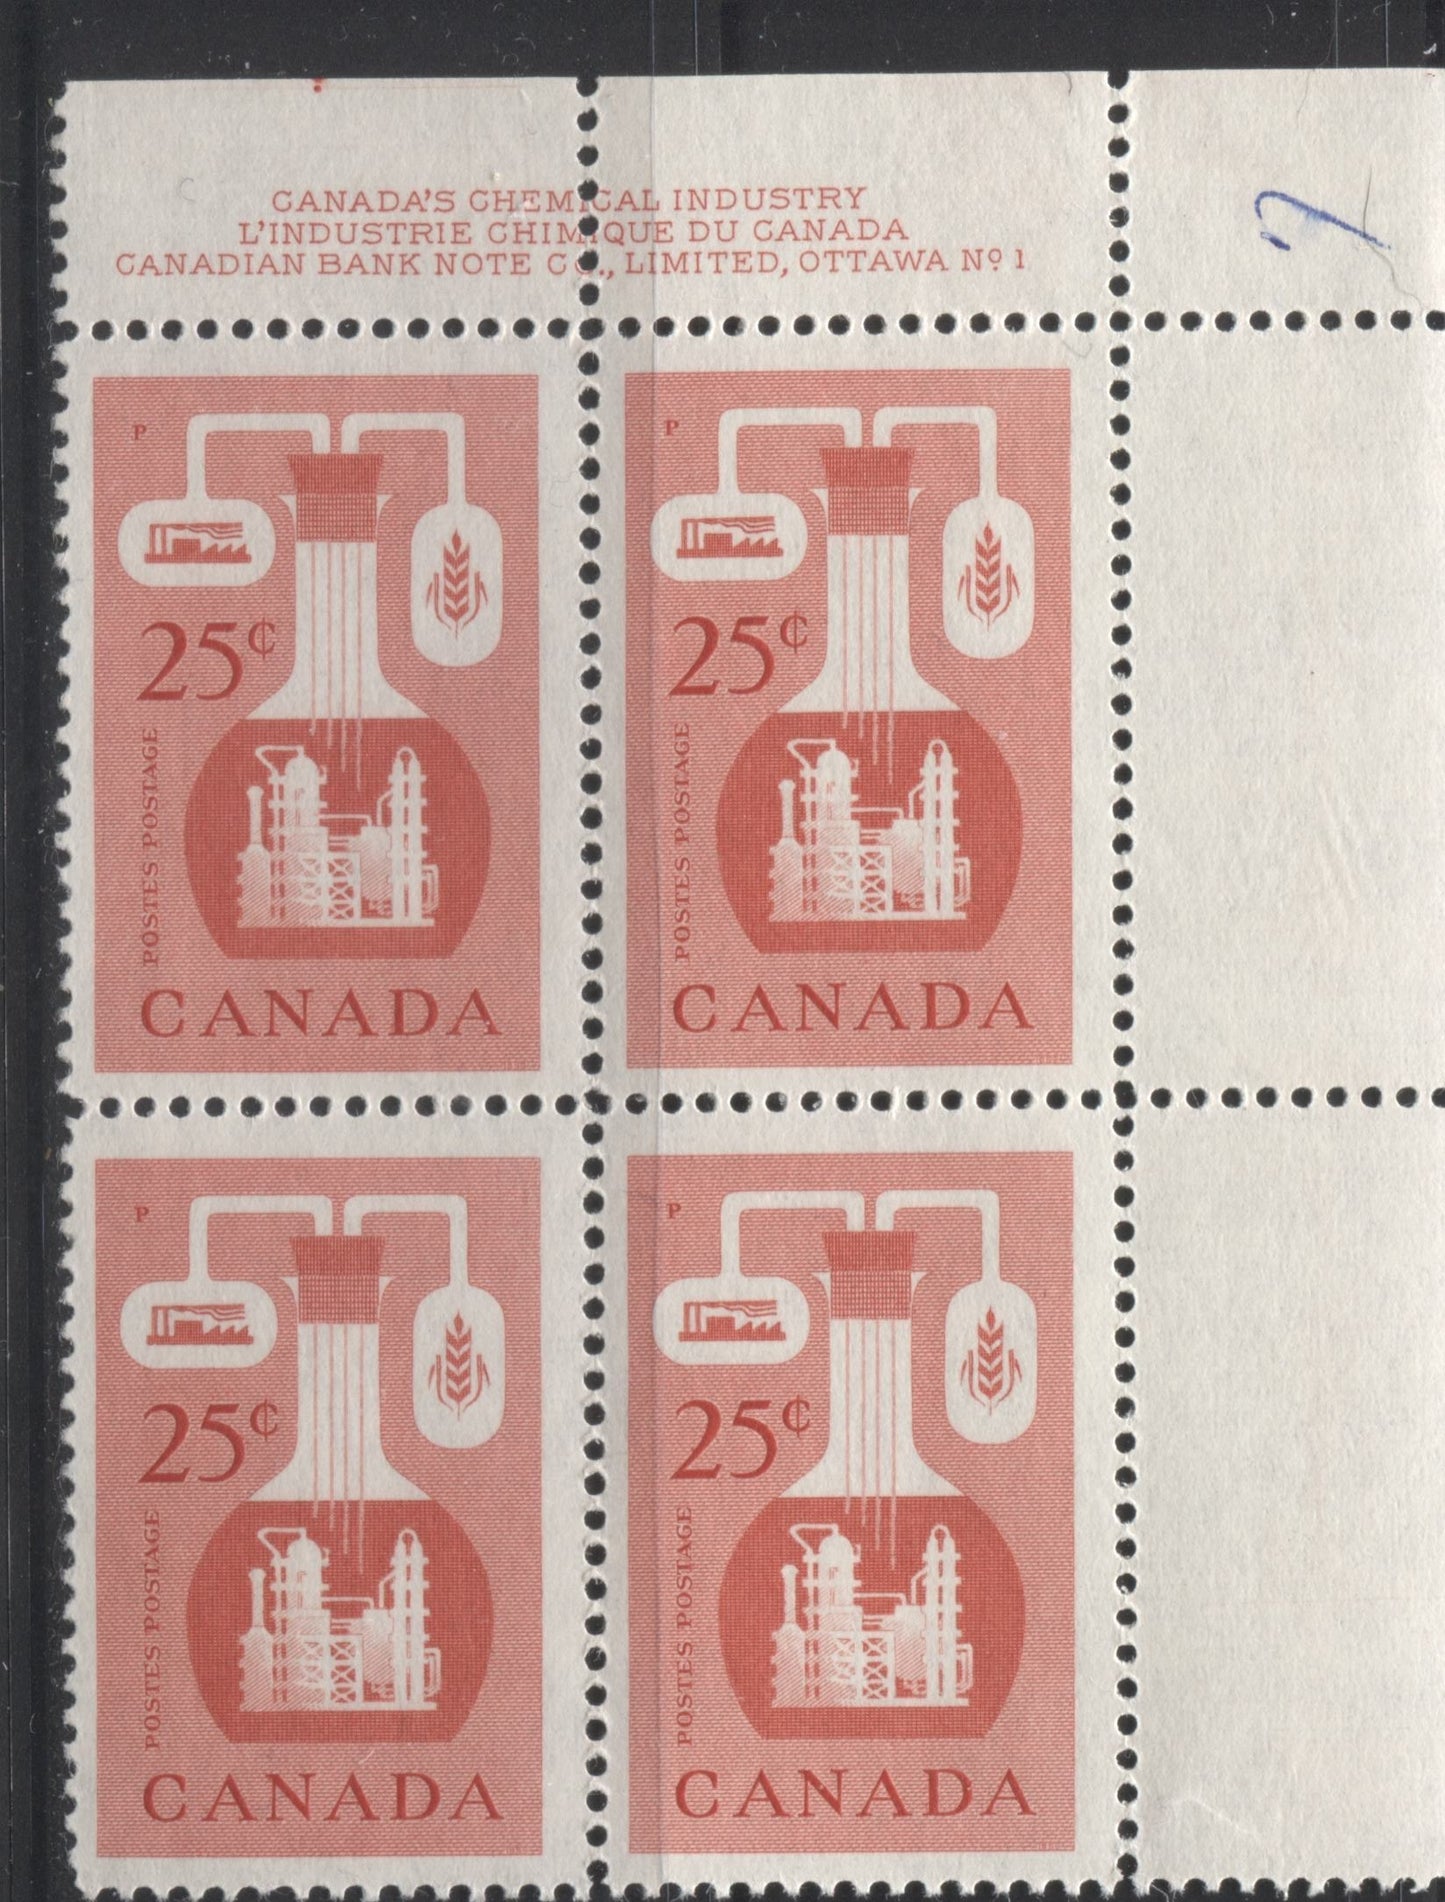 Canada #363 25c Deep Vermilion Chemical Industry, 1954-67 Wilding and Cameo Issue, a FNH Upper Right Plate 1 Block on Dull Fluorescent Grey Violet Smooth Paper, Perf. 11.85 x 11.95